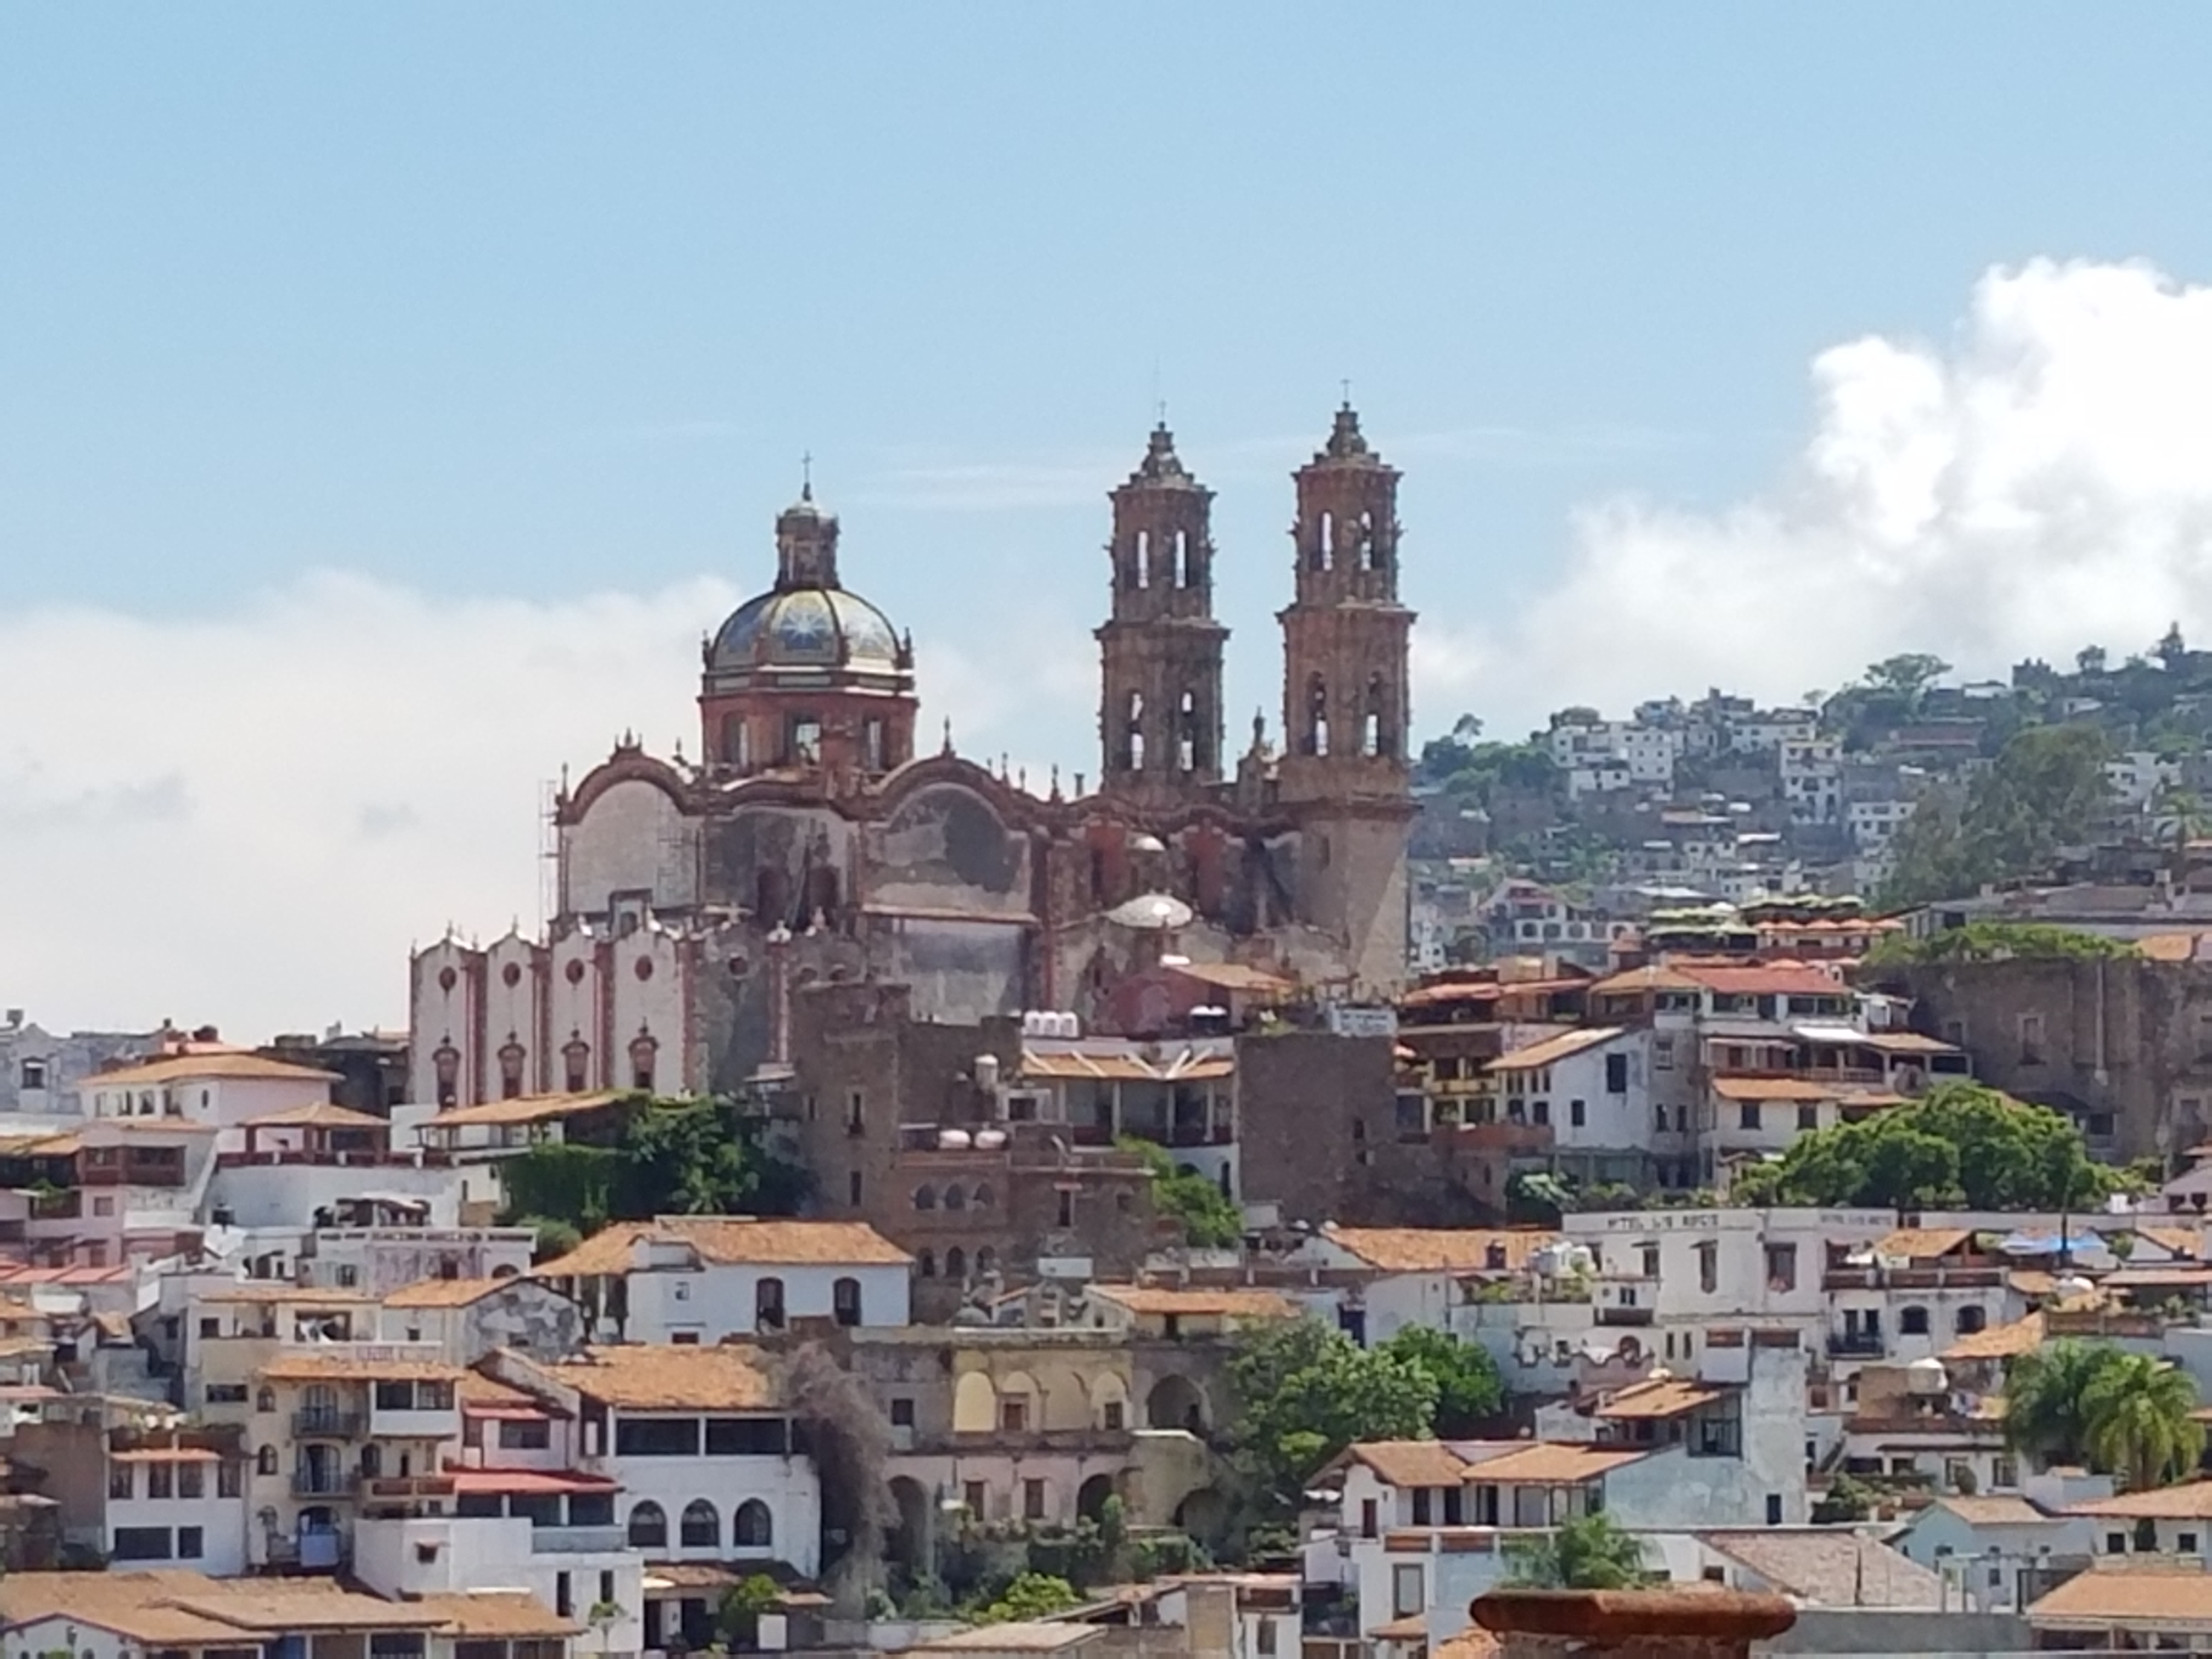 The city of Taxco